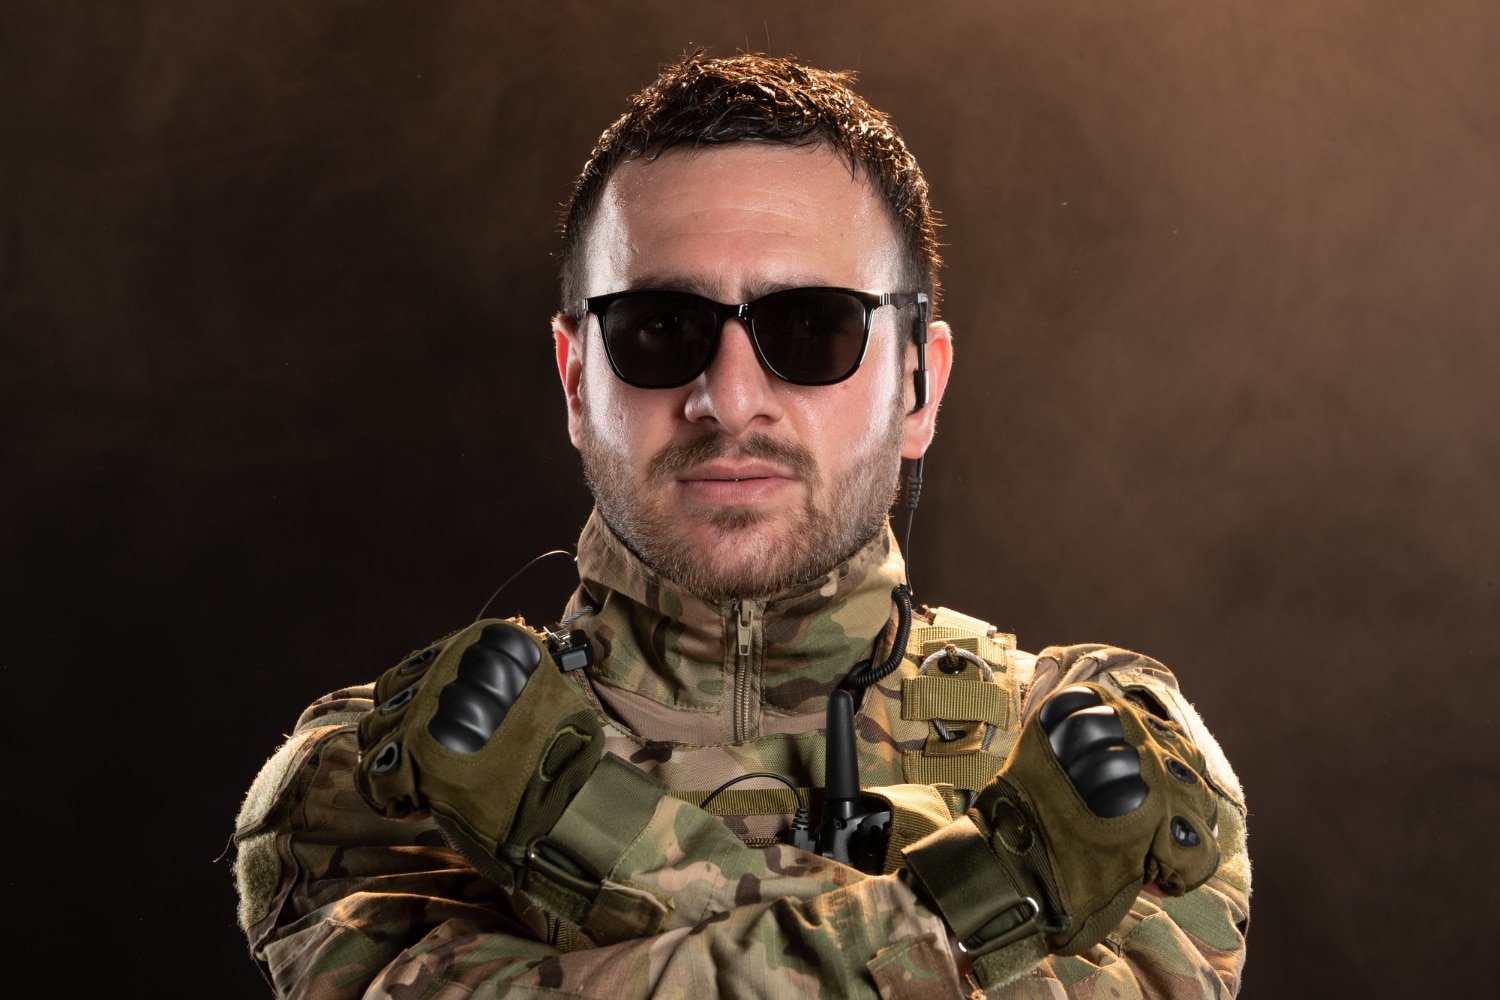 Experience Military-Grade Eyewear With Oakley Standard Issue’s Tactical Sunglasses